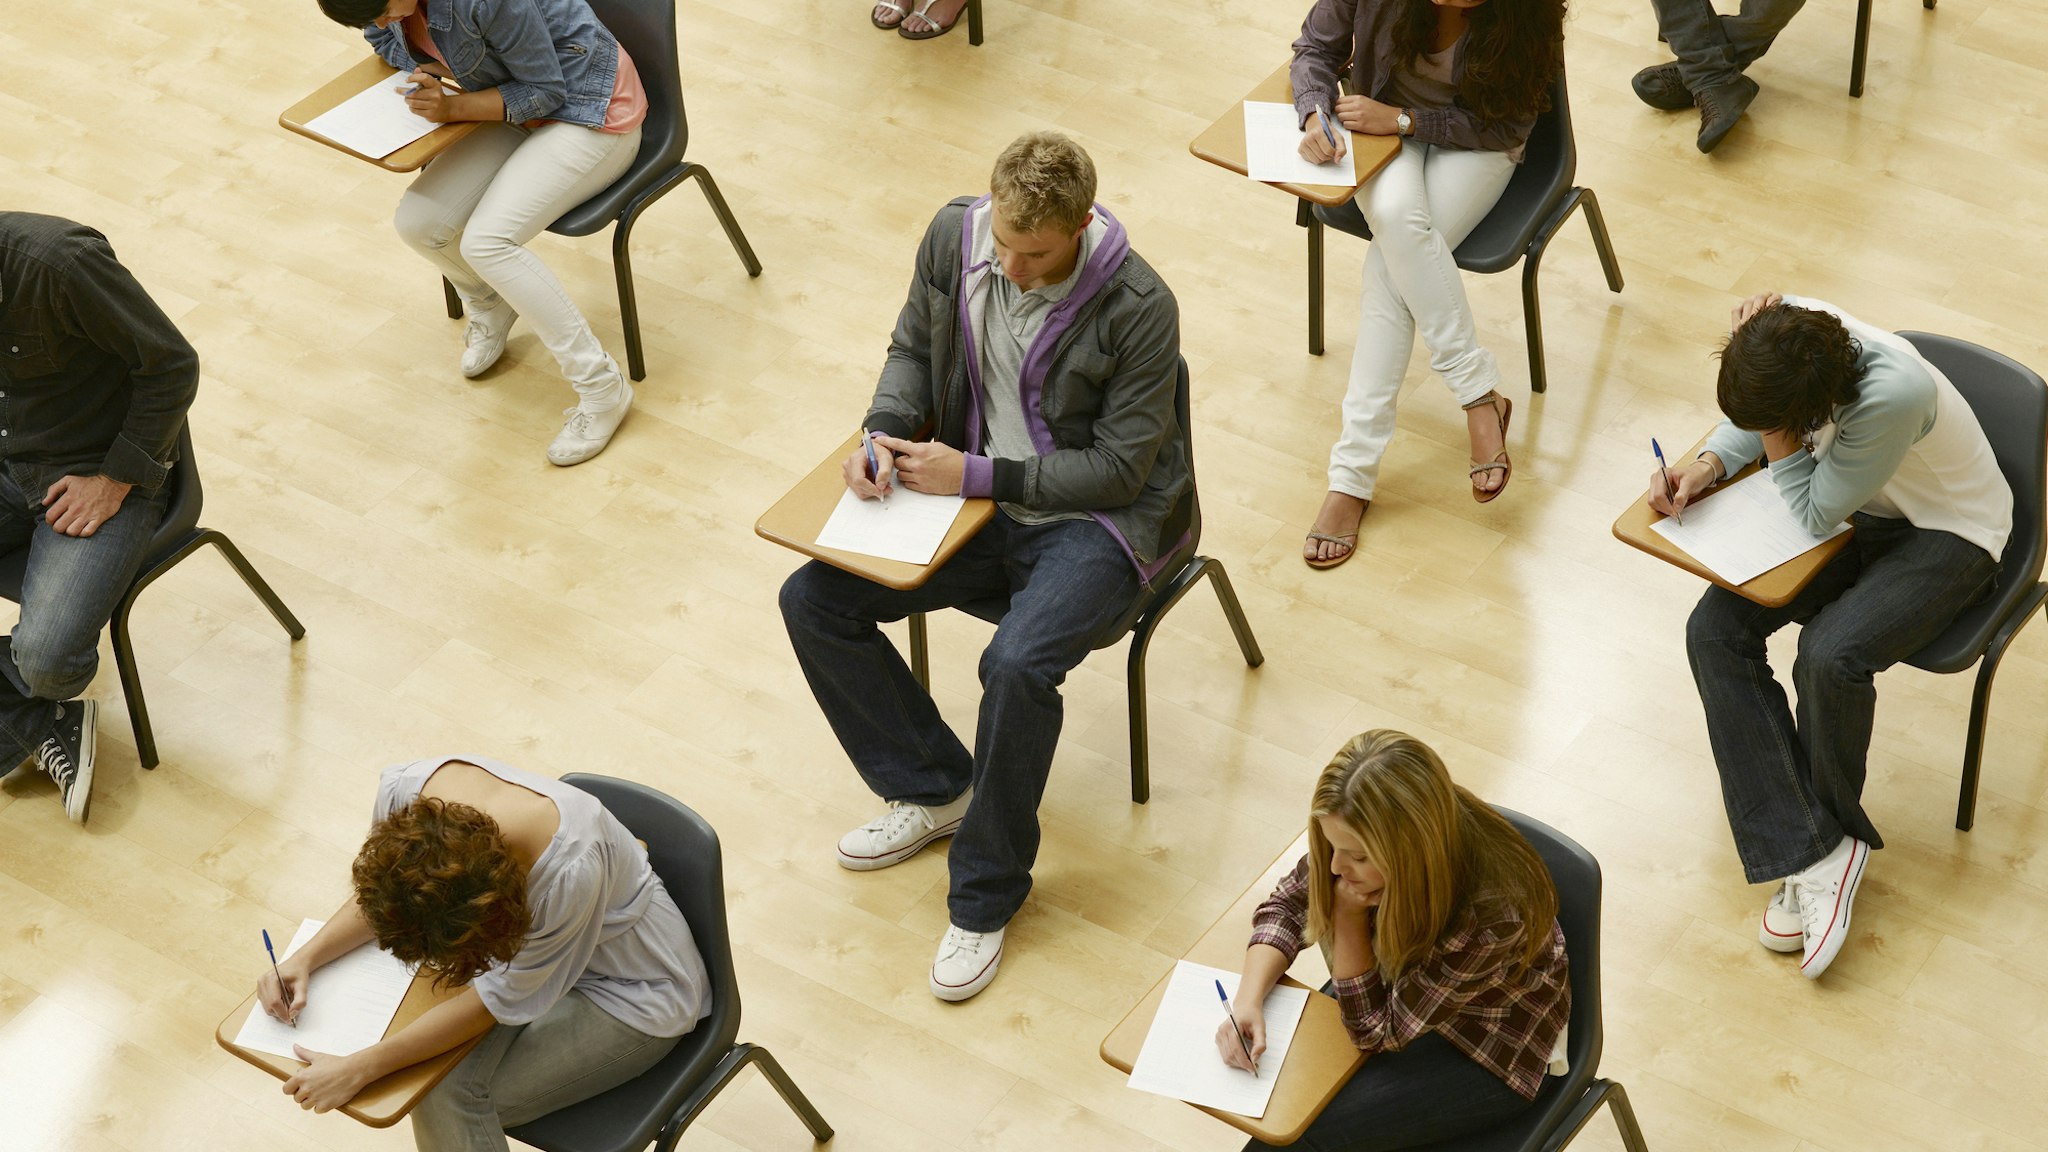 College students taking test in classroom - stock photo